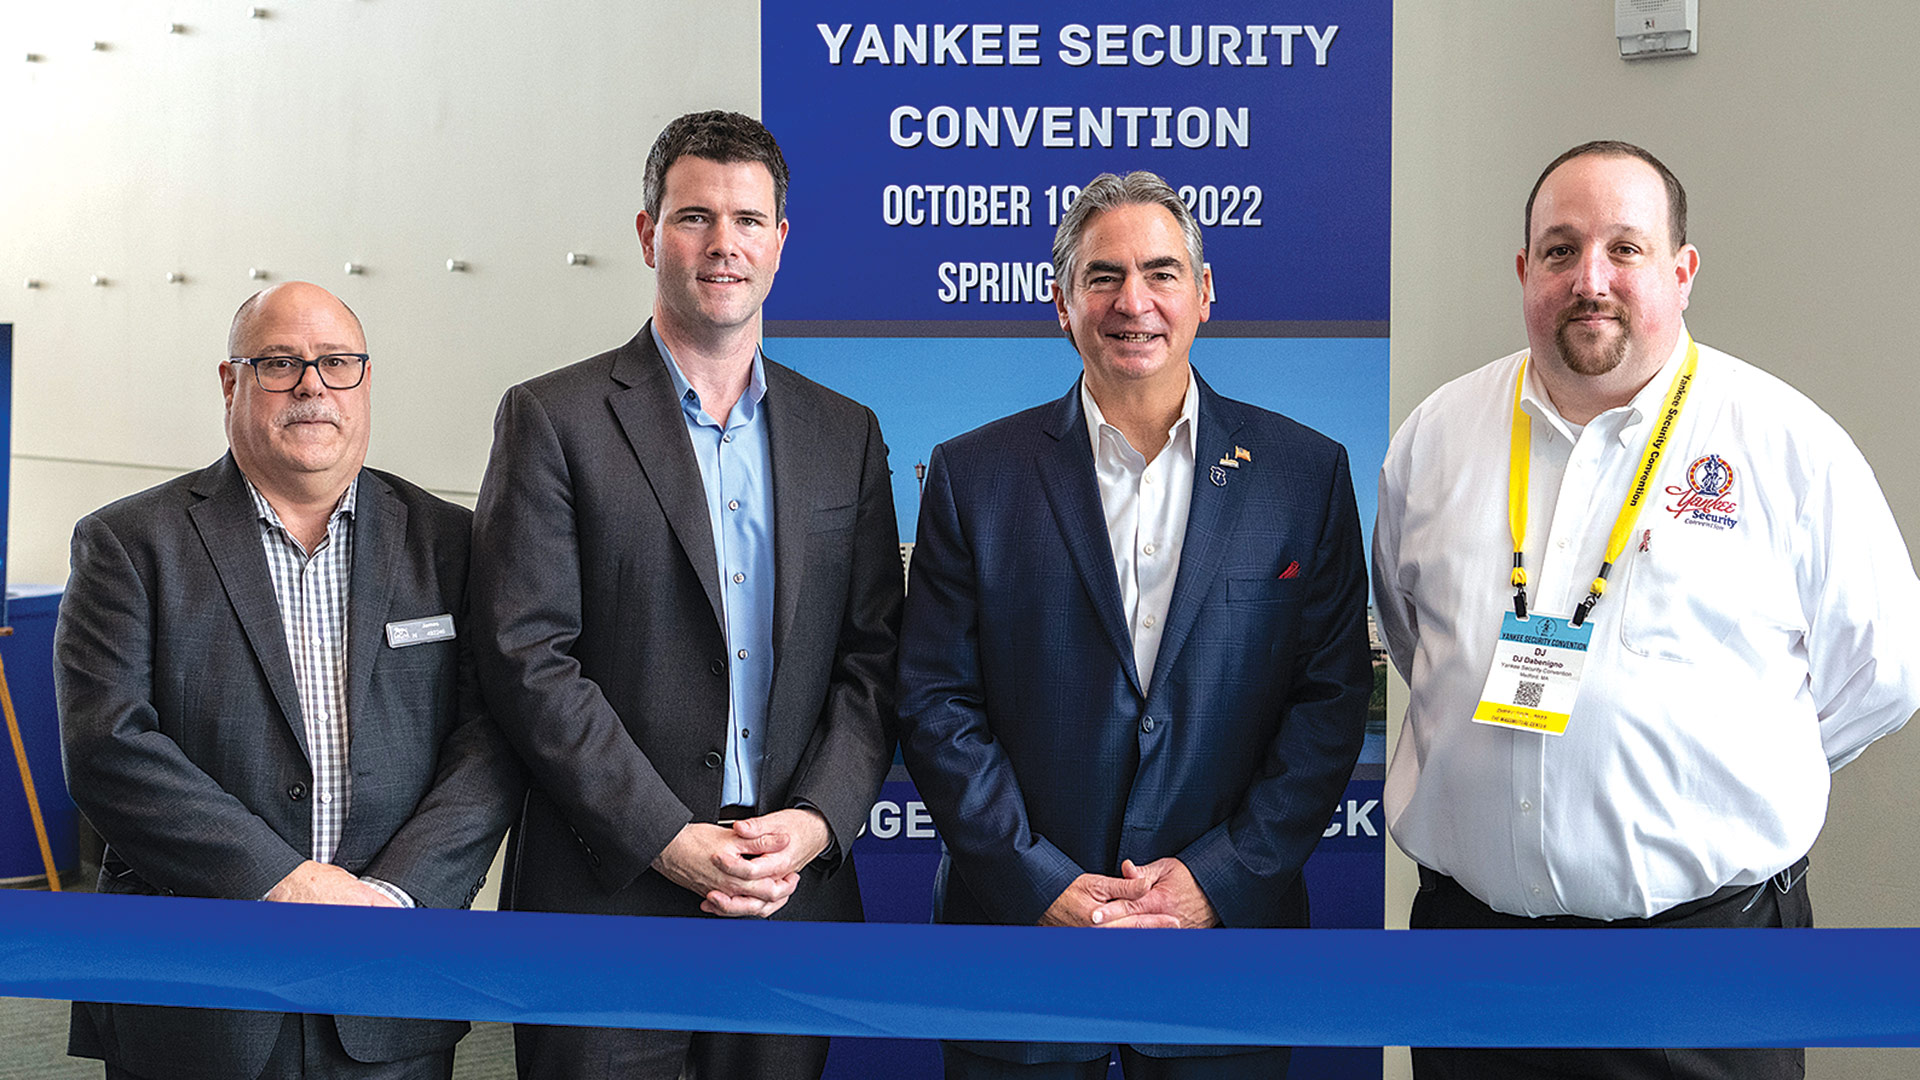 Attending a ribbon cutting for the Yankee Security convention